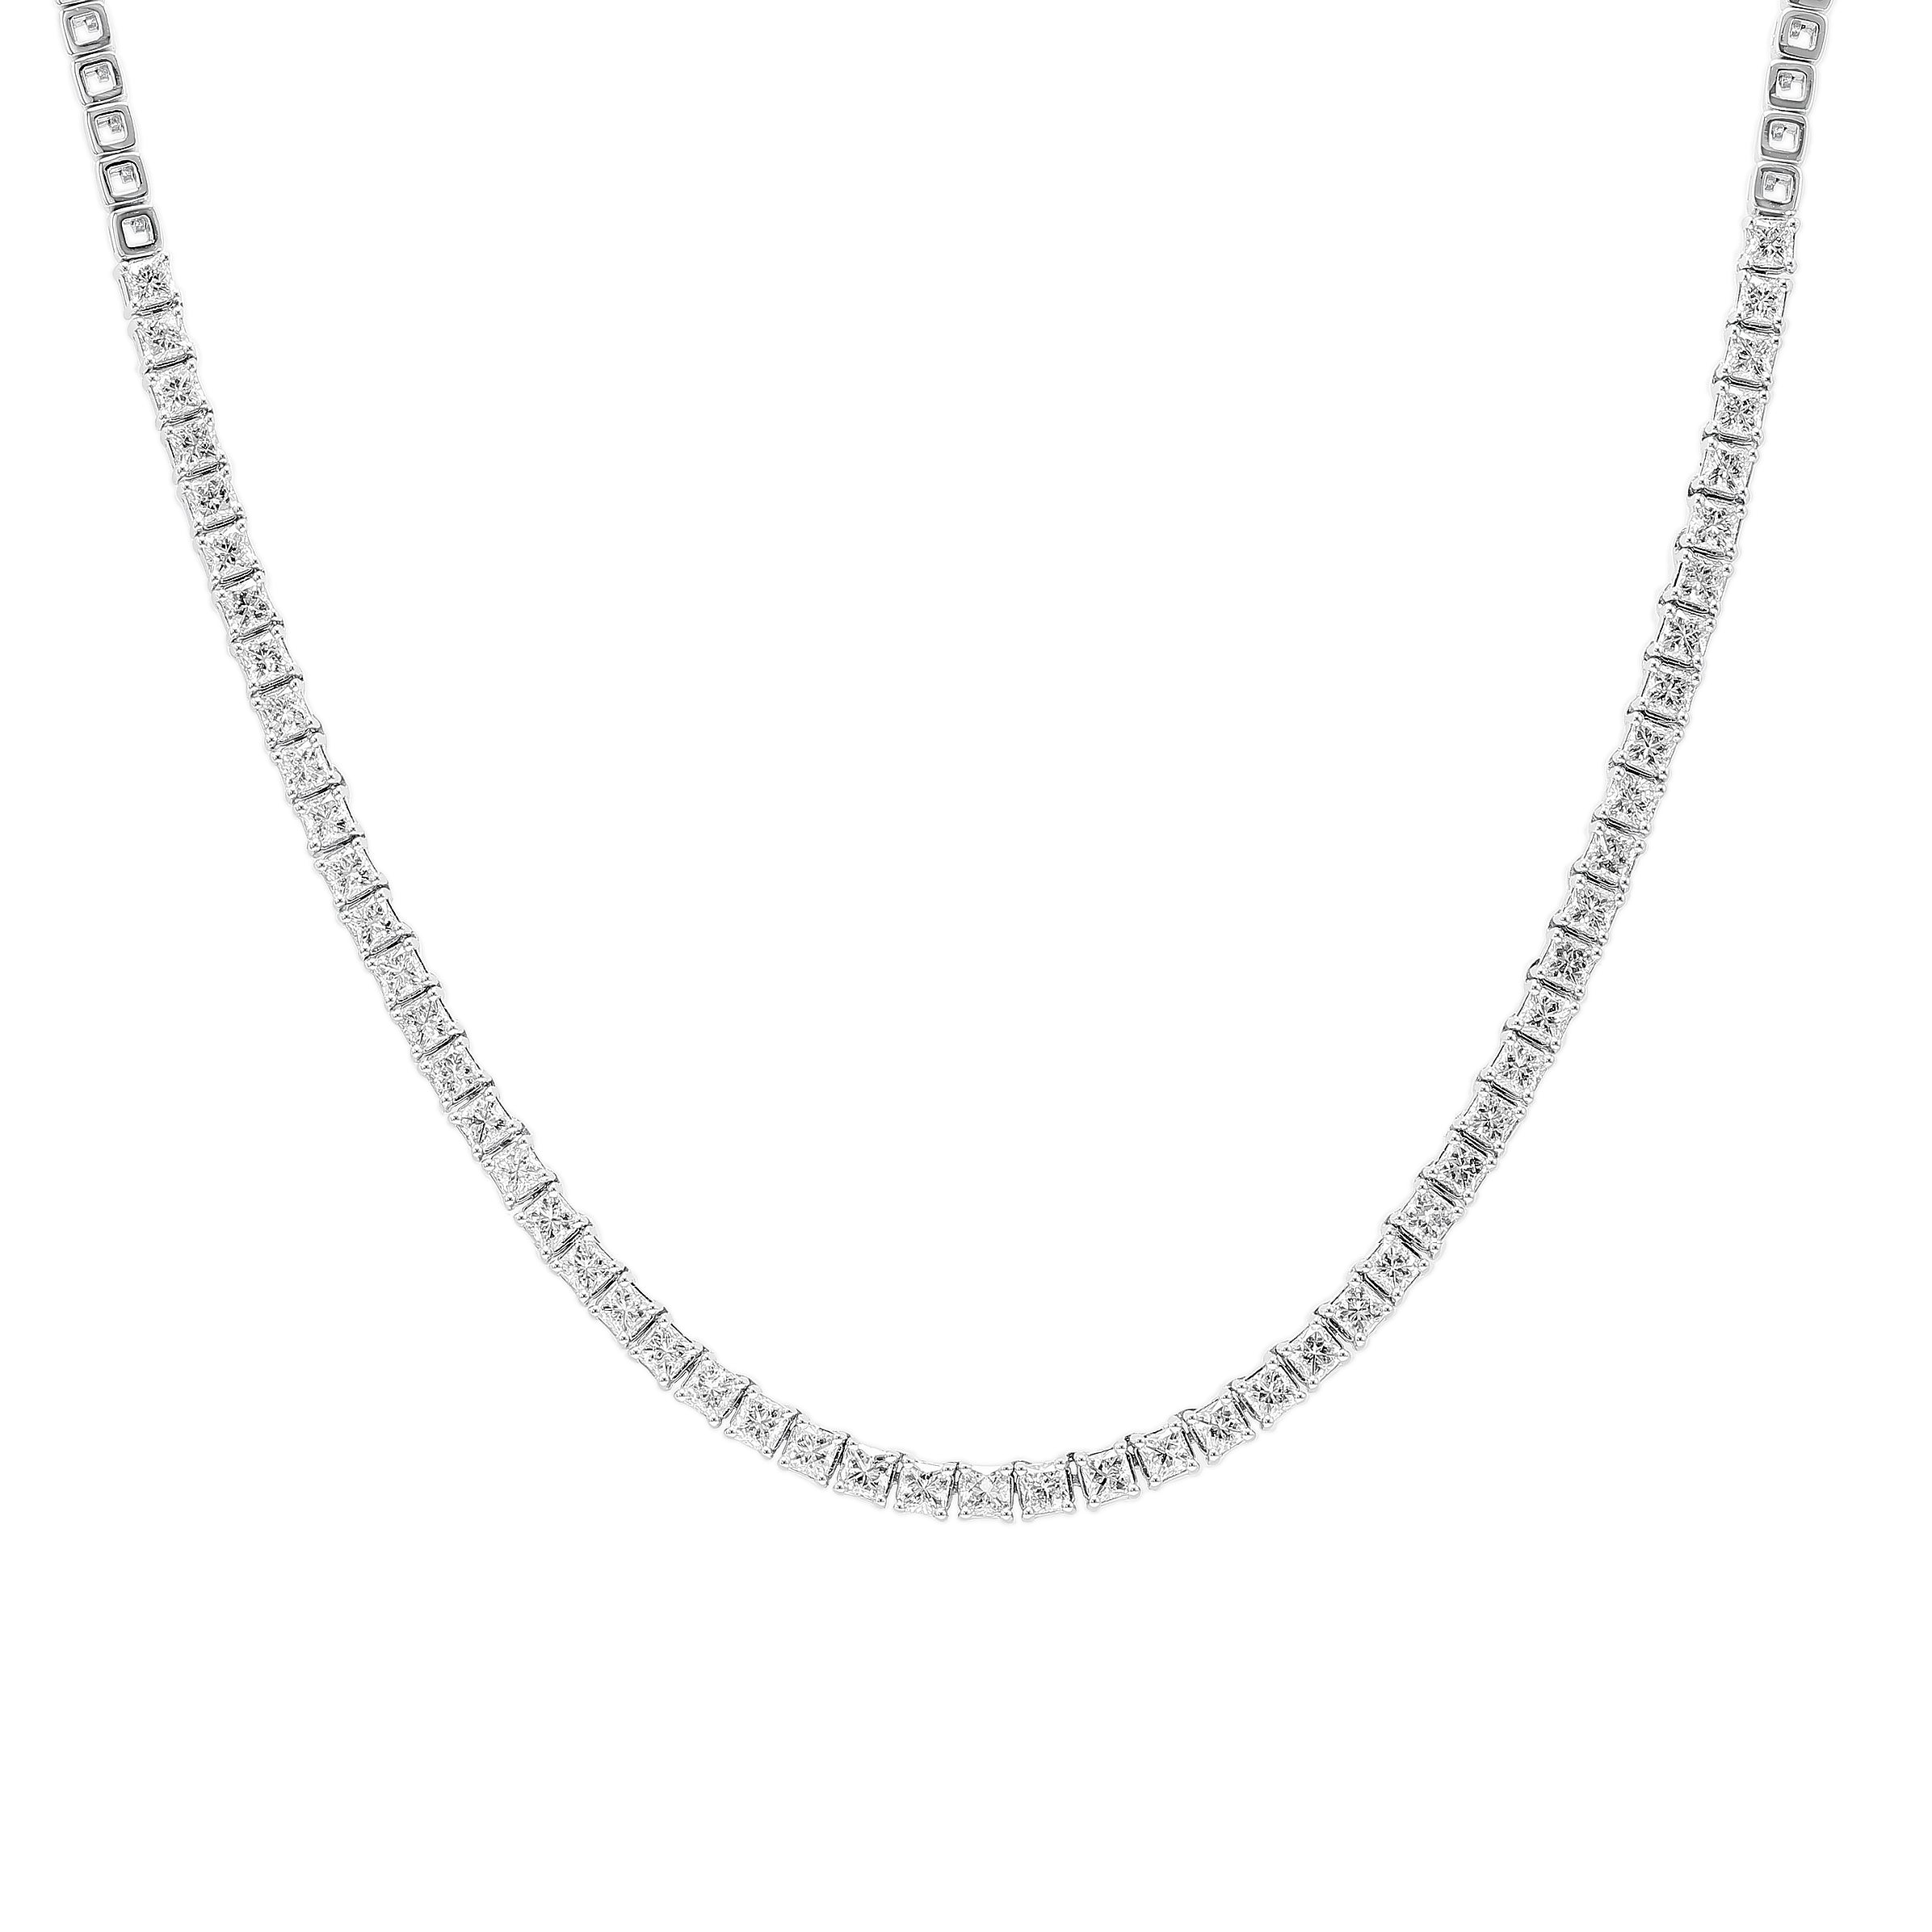 Shimansky - My Girl Diamond Tennis Necklace 4.97ct Crafted in 18K White Gold